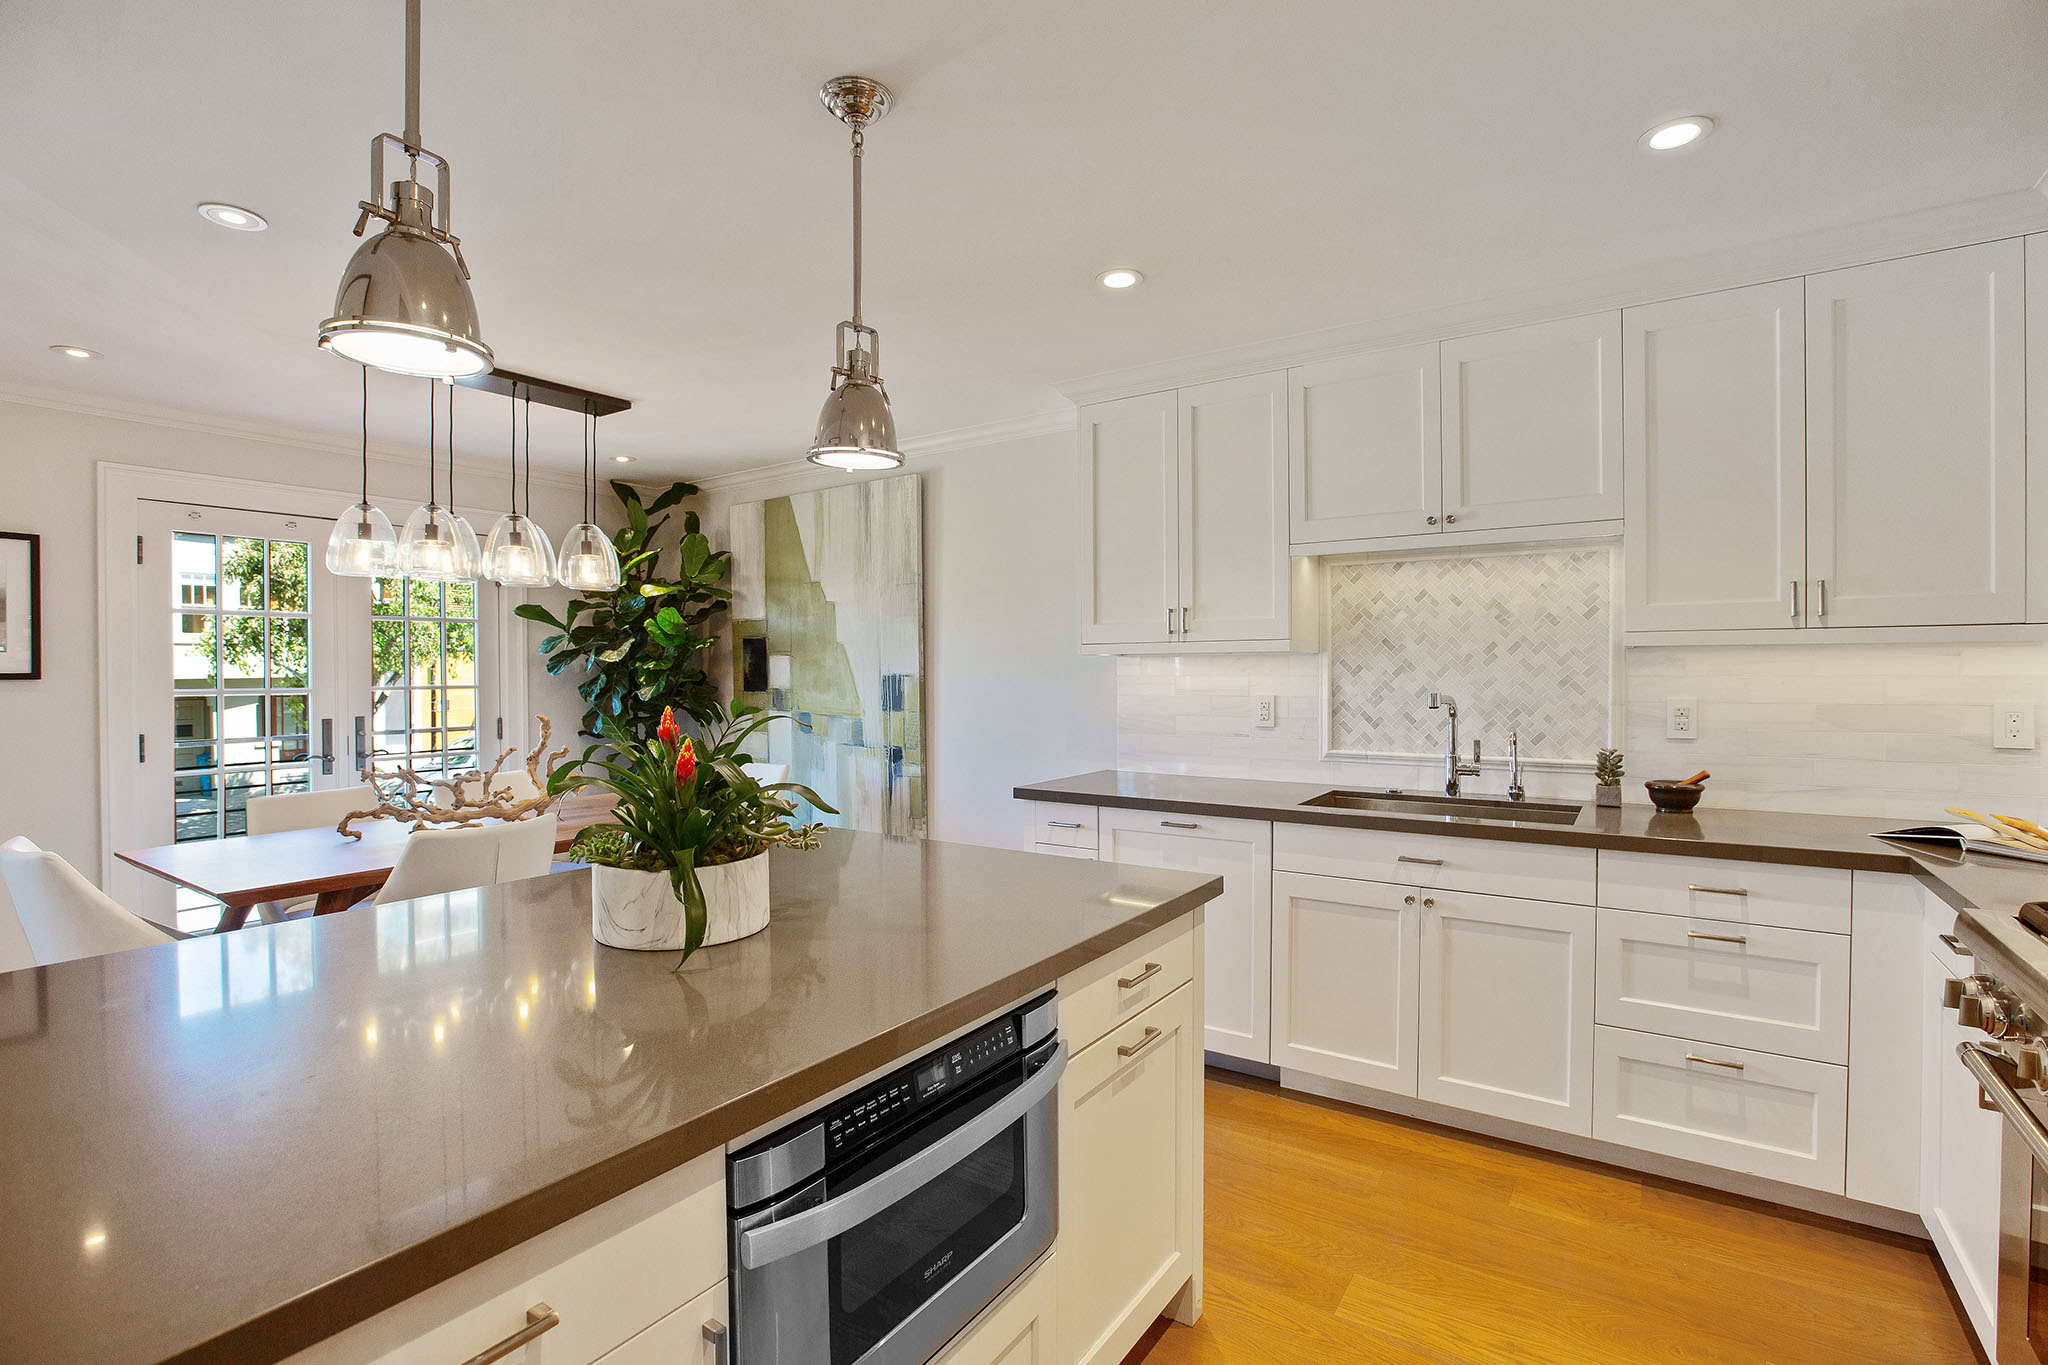 Property Photo: Kitchen has an island that has stone counter top with built in microwave. 